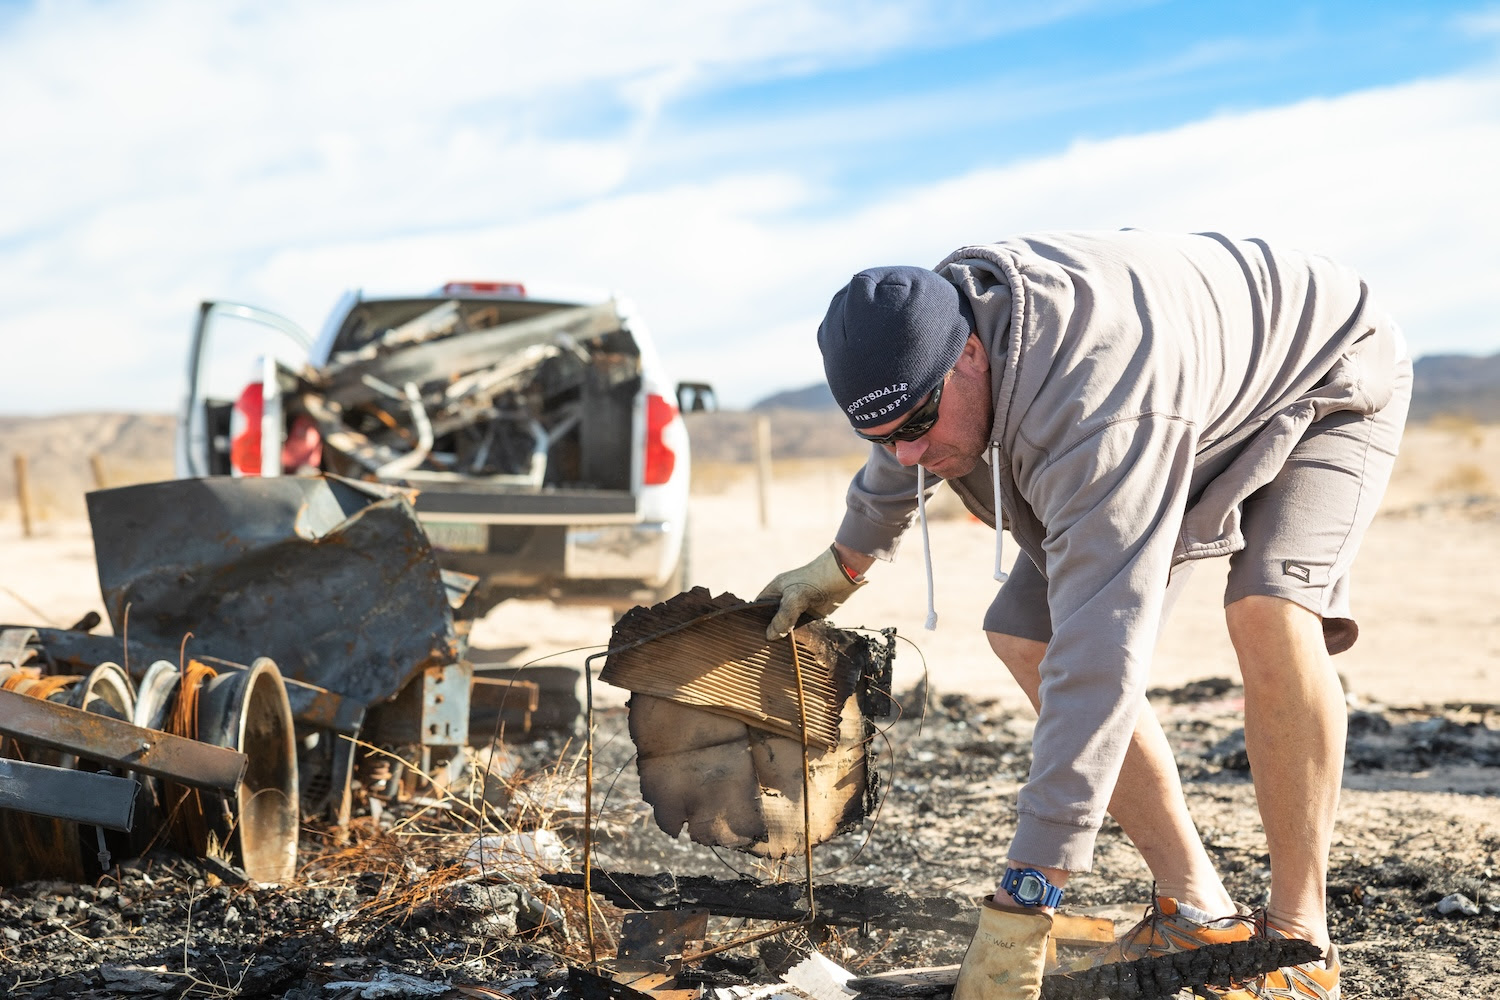 Parker 400 Festivities Kick Off With Inaugural Desert Clean-Up presented by Tread Lightly!